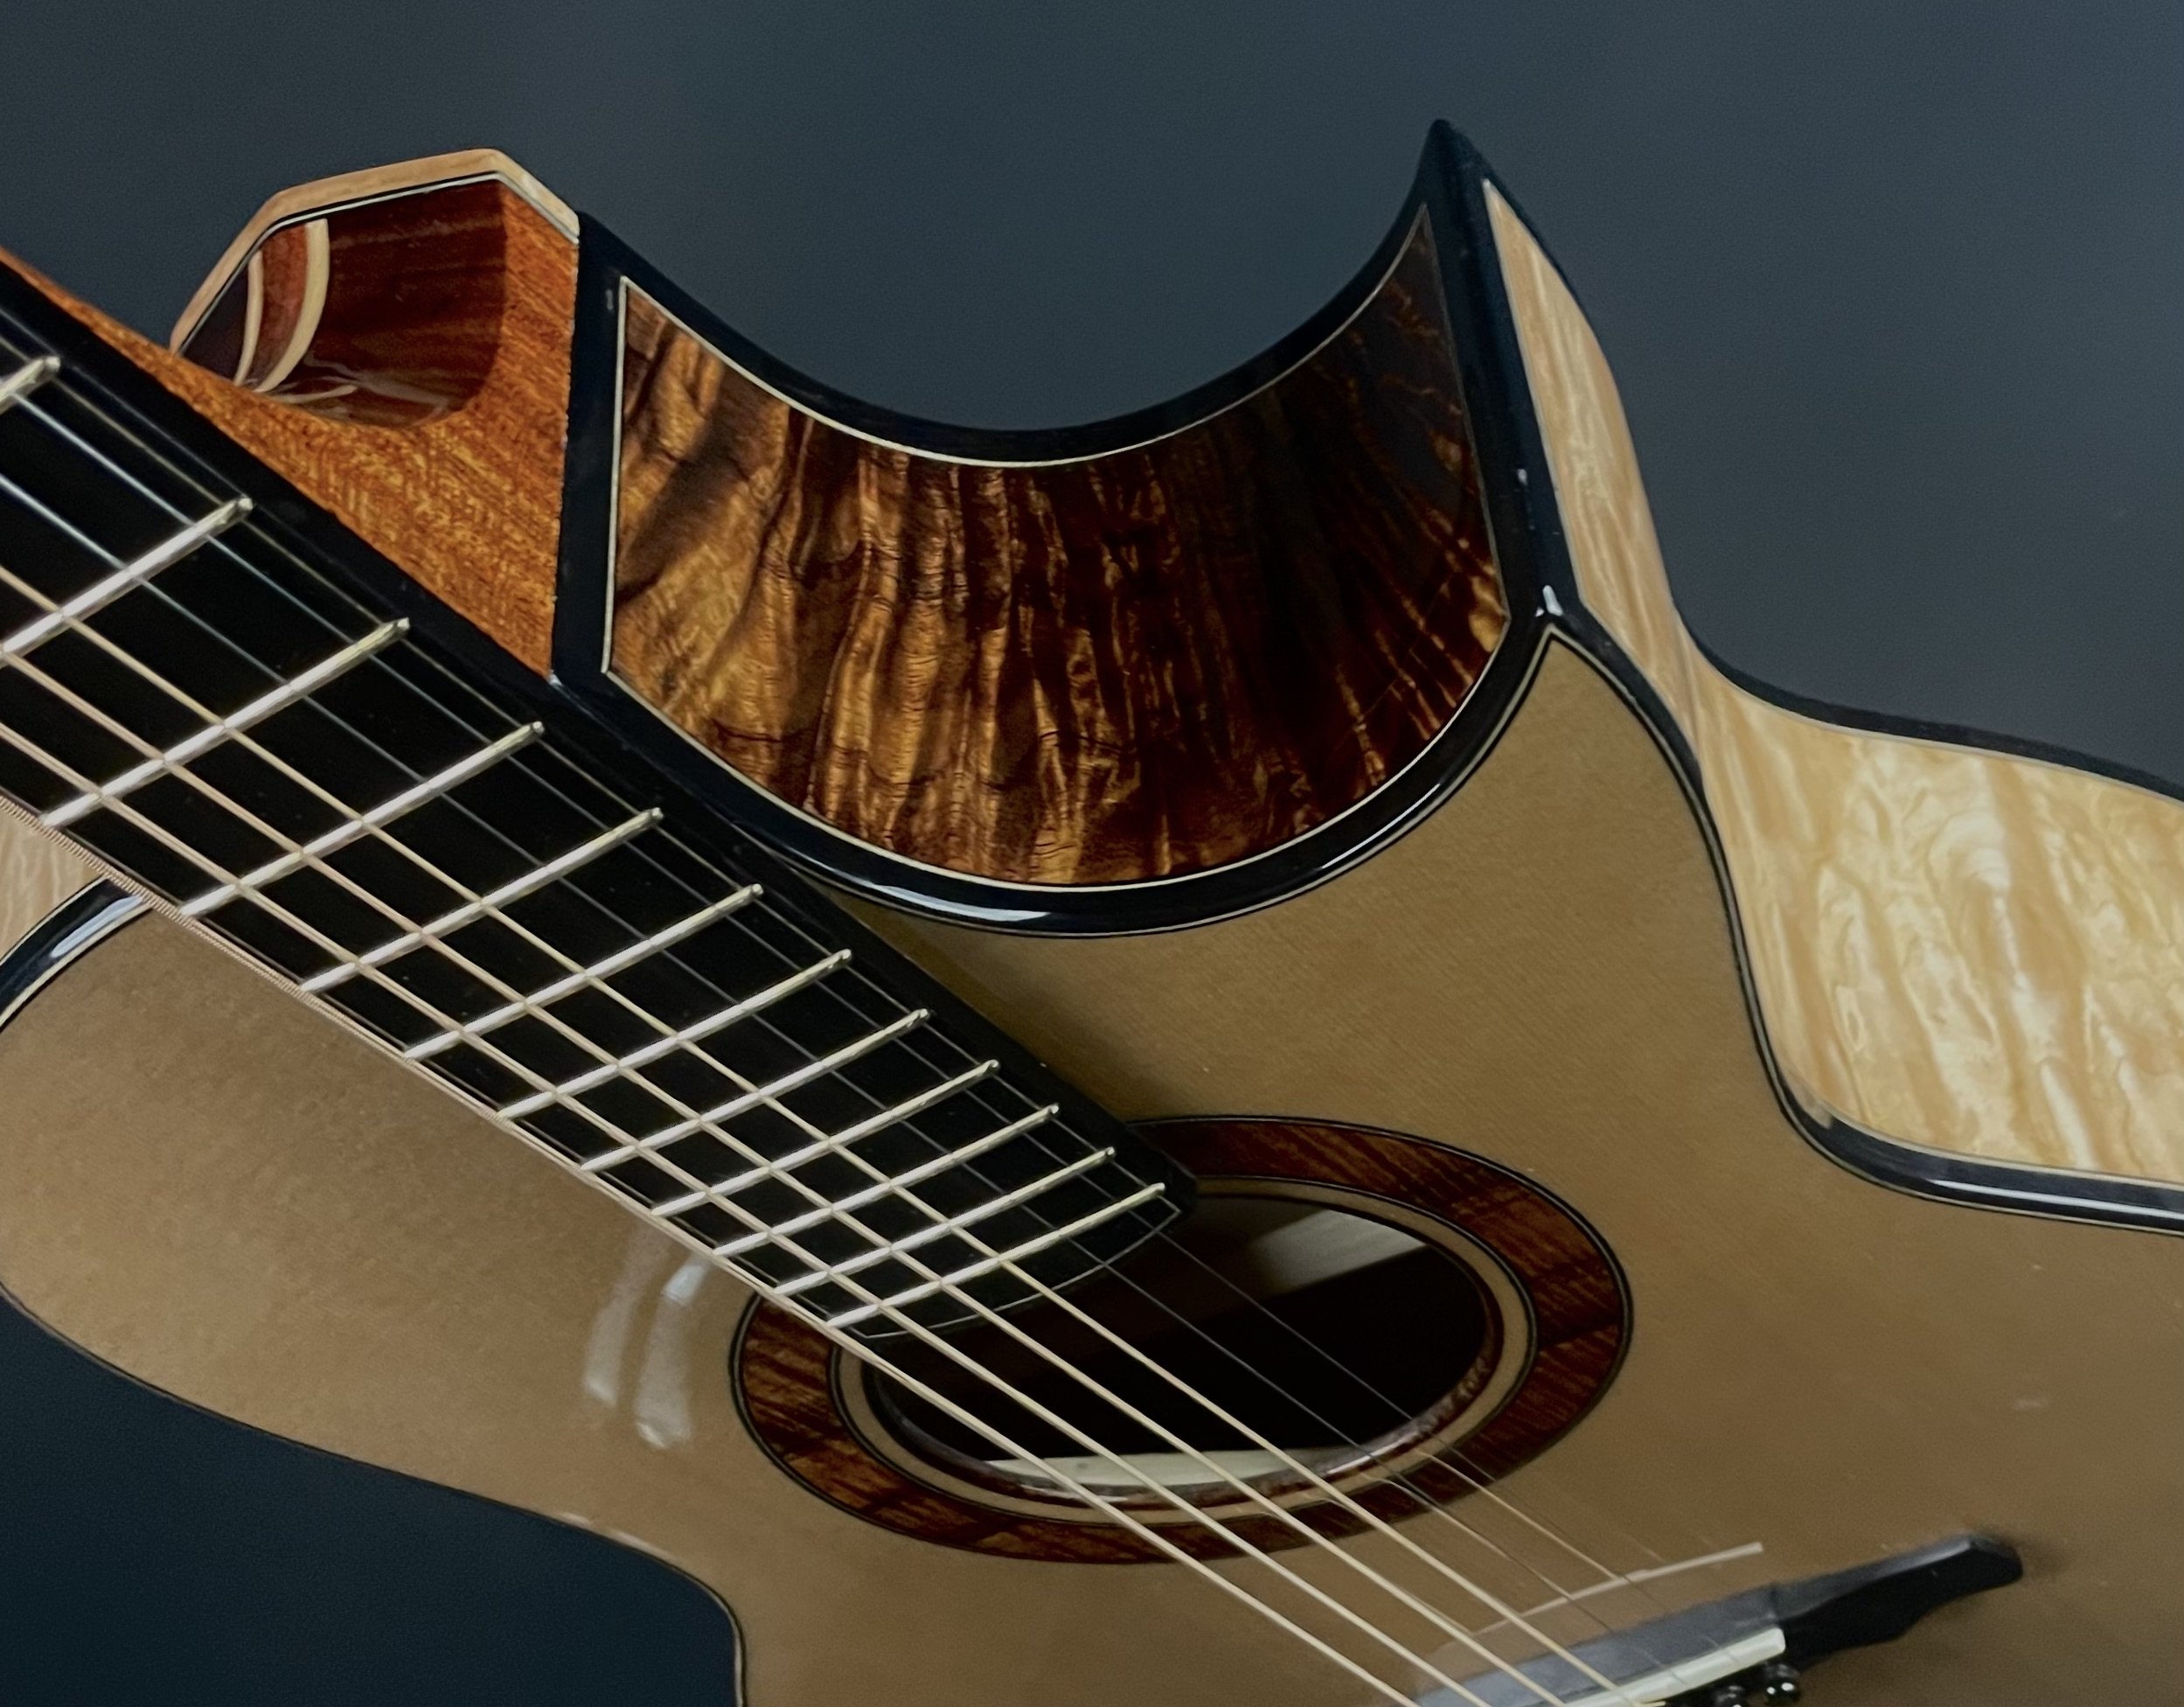 Irv SP Maple quilted cutaway angle.jpg